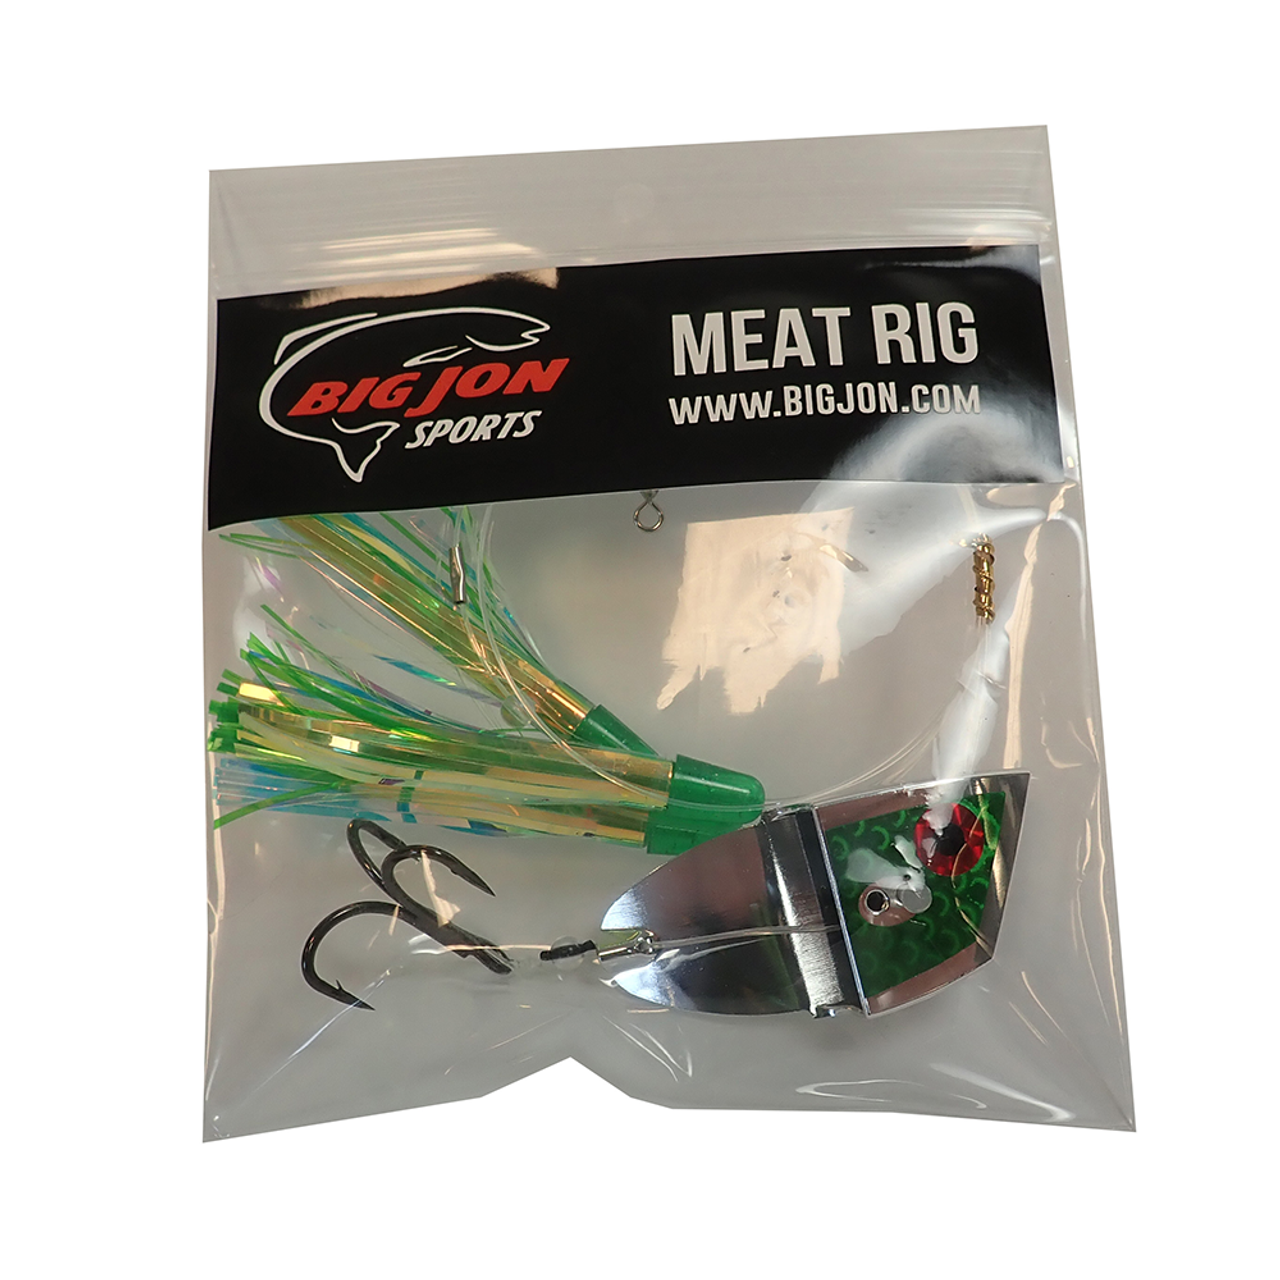  Matzuo Big Game Saltwater Porgy Rig : Fishing Bait Rigs :  Sports & Outdoors